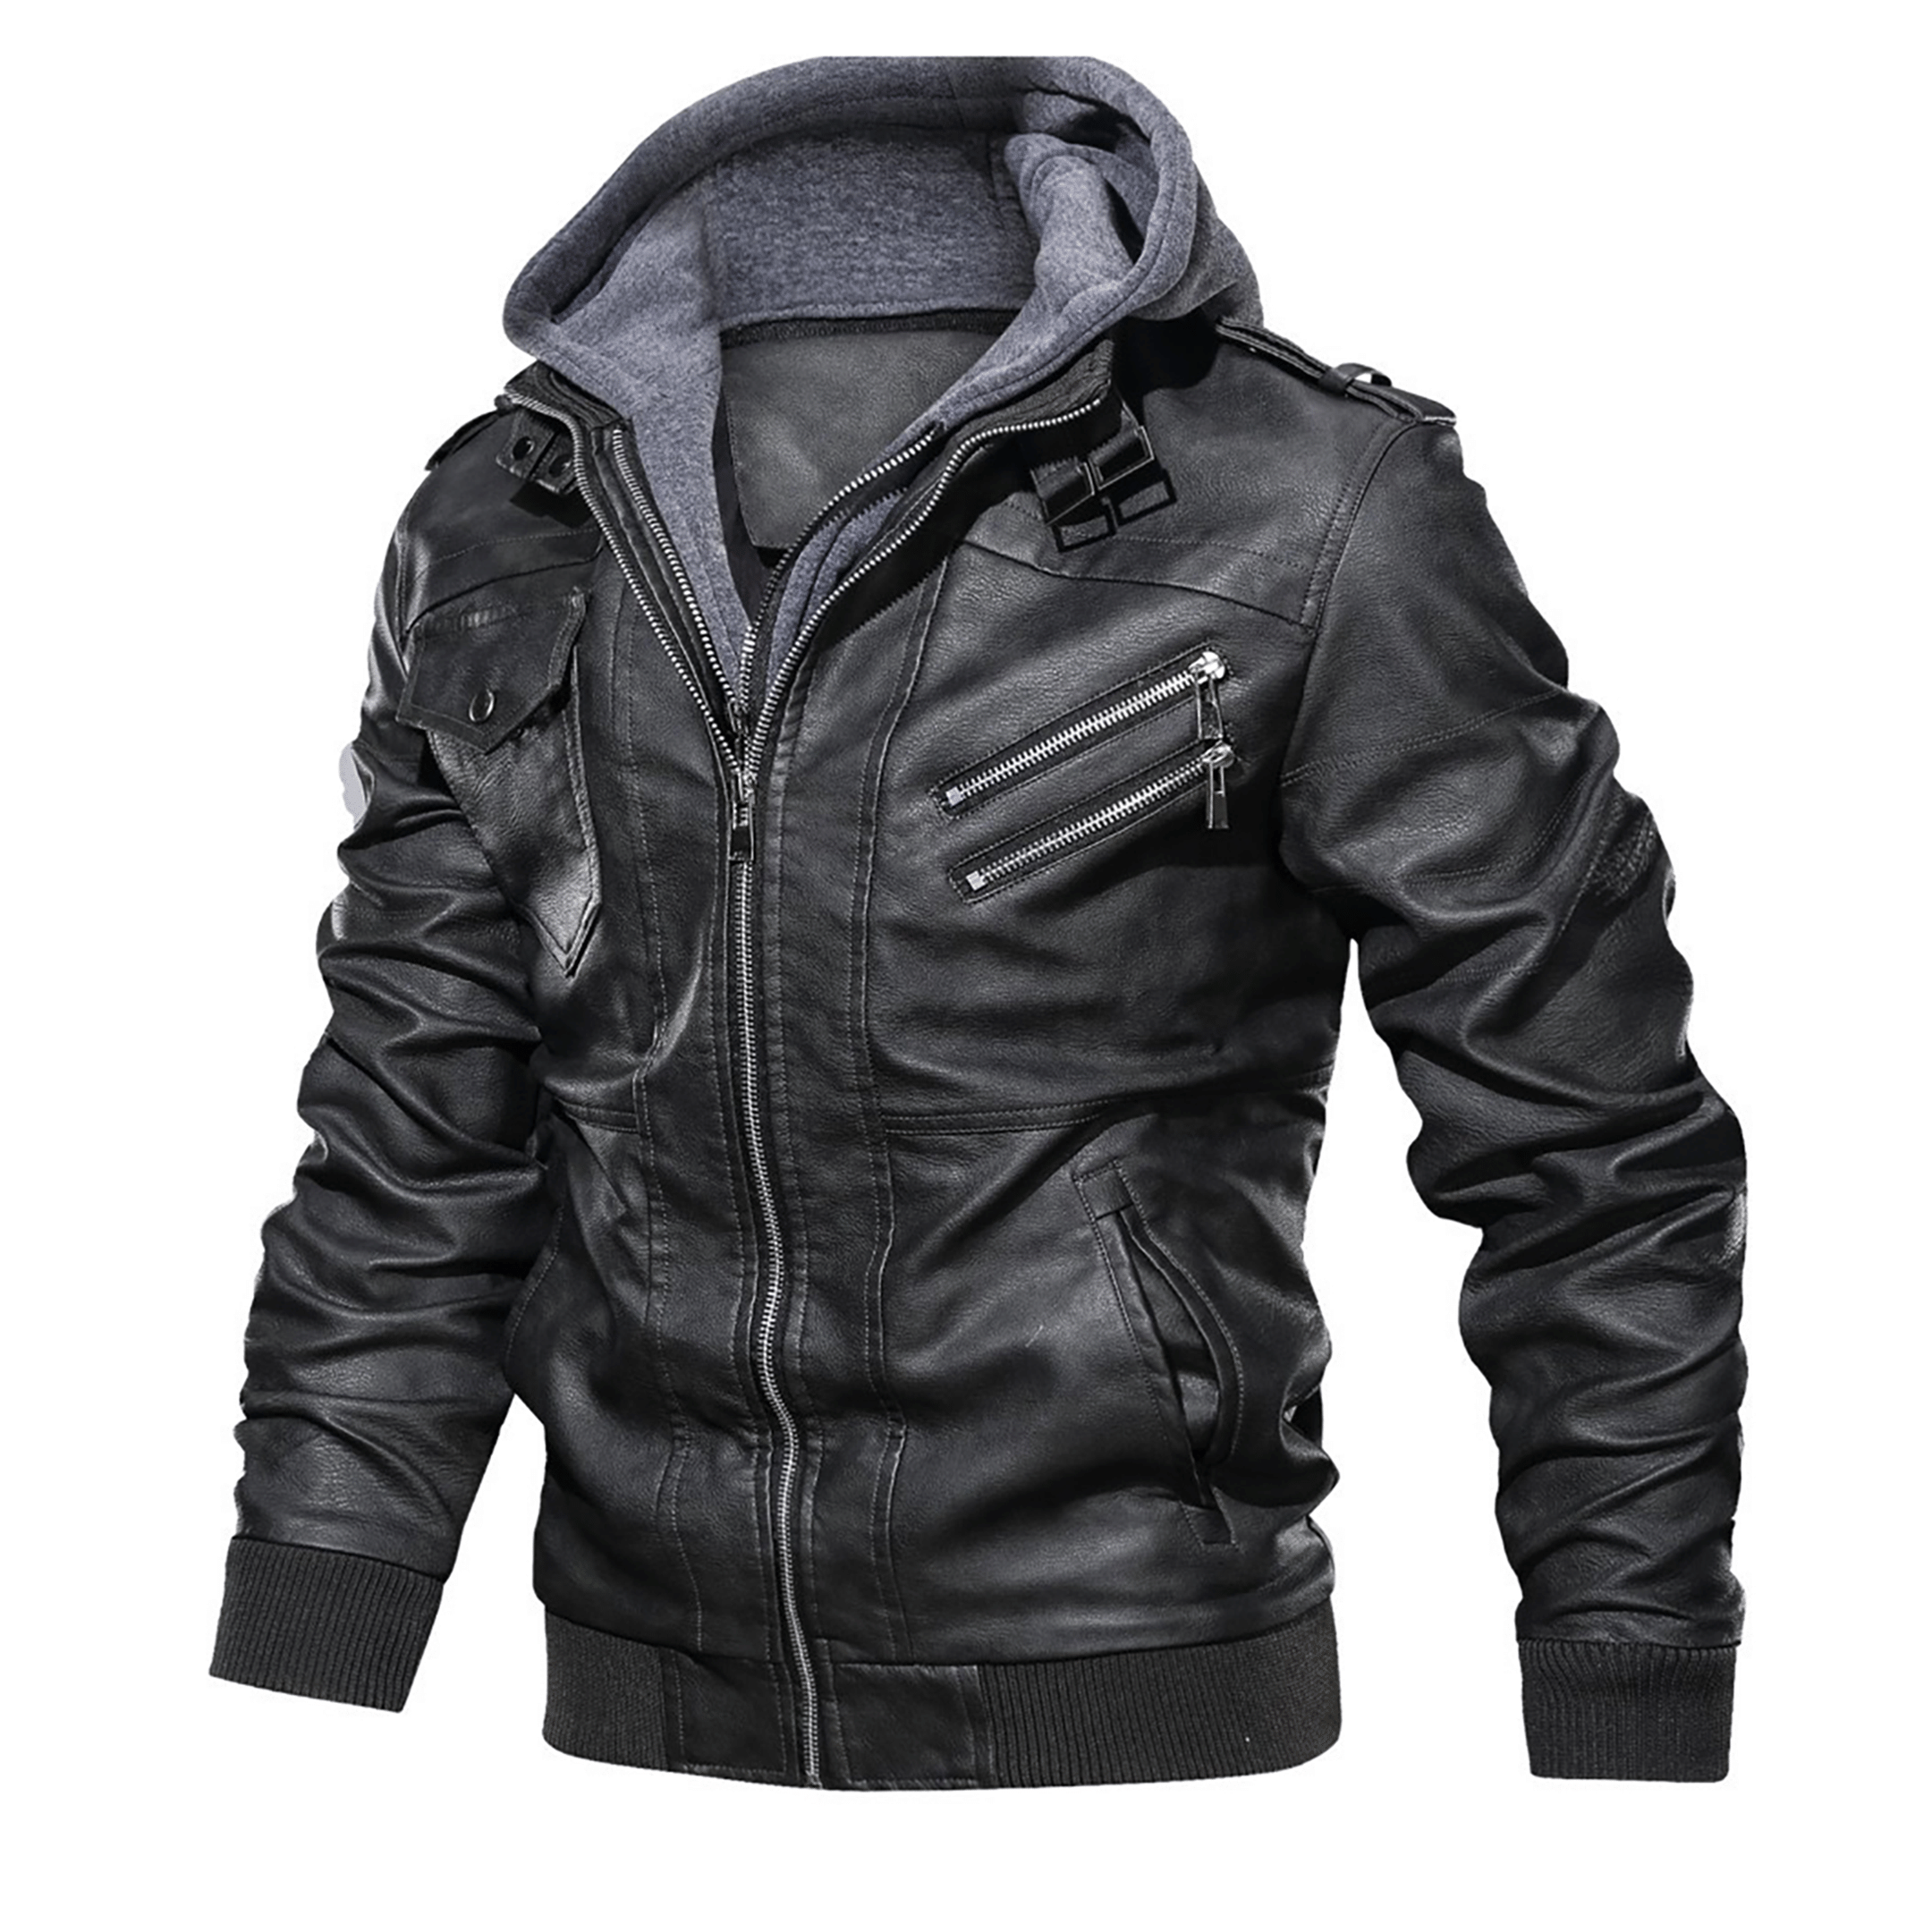 Top leather jackets and latest products 399